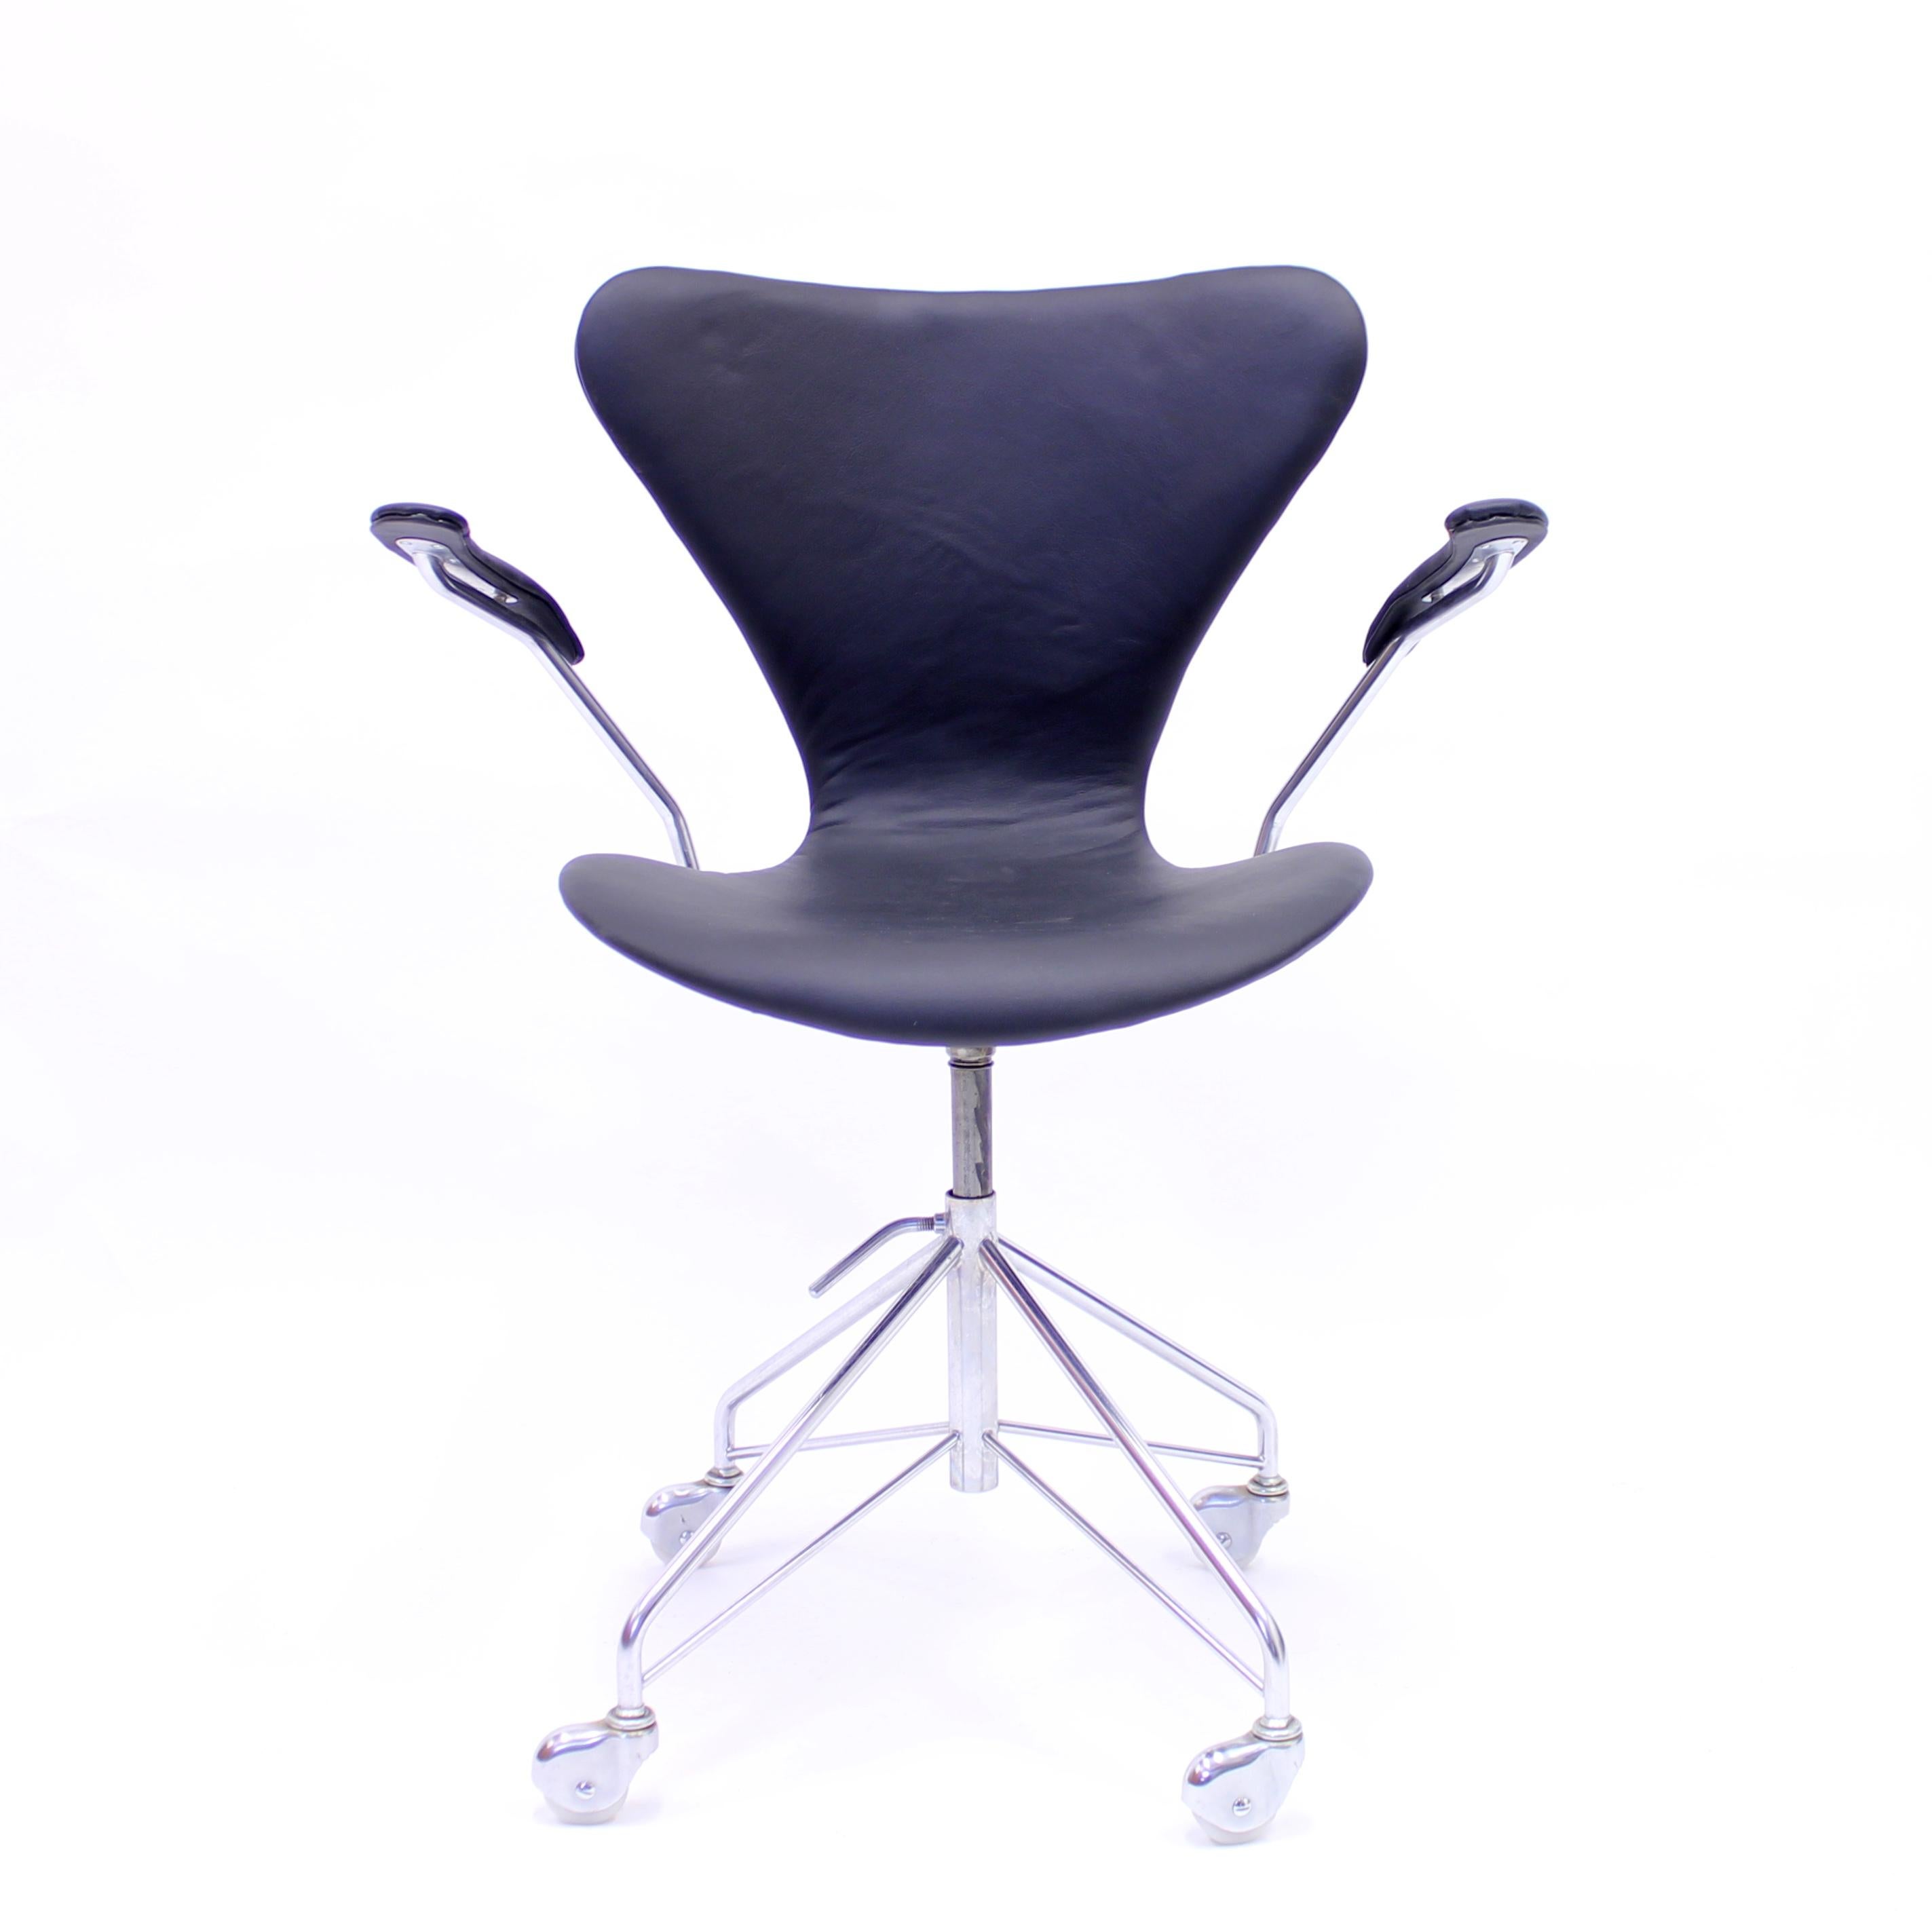 Early production Series 7 office chair with armrests, model 3217, designed by Arne Jacobsen for Fritz Hansen. The base has a swivel function and the seat is height adjustable between 45-58 cm. New black leather upholstery, four-wheel base. This